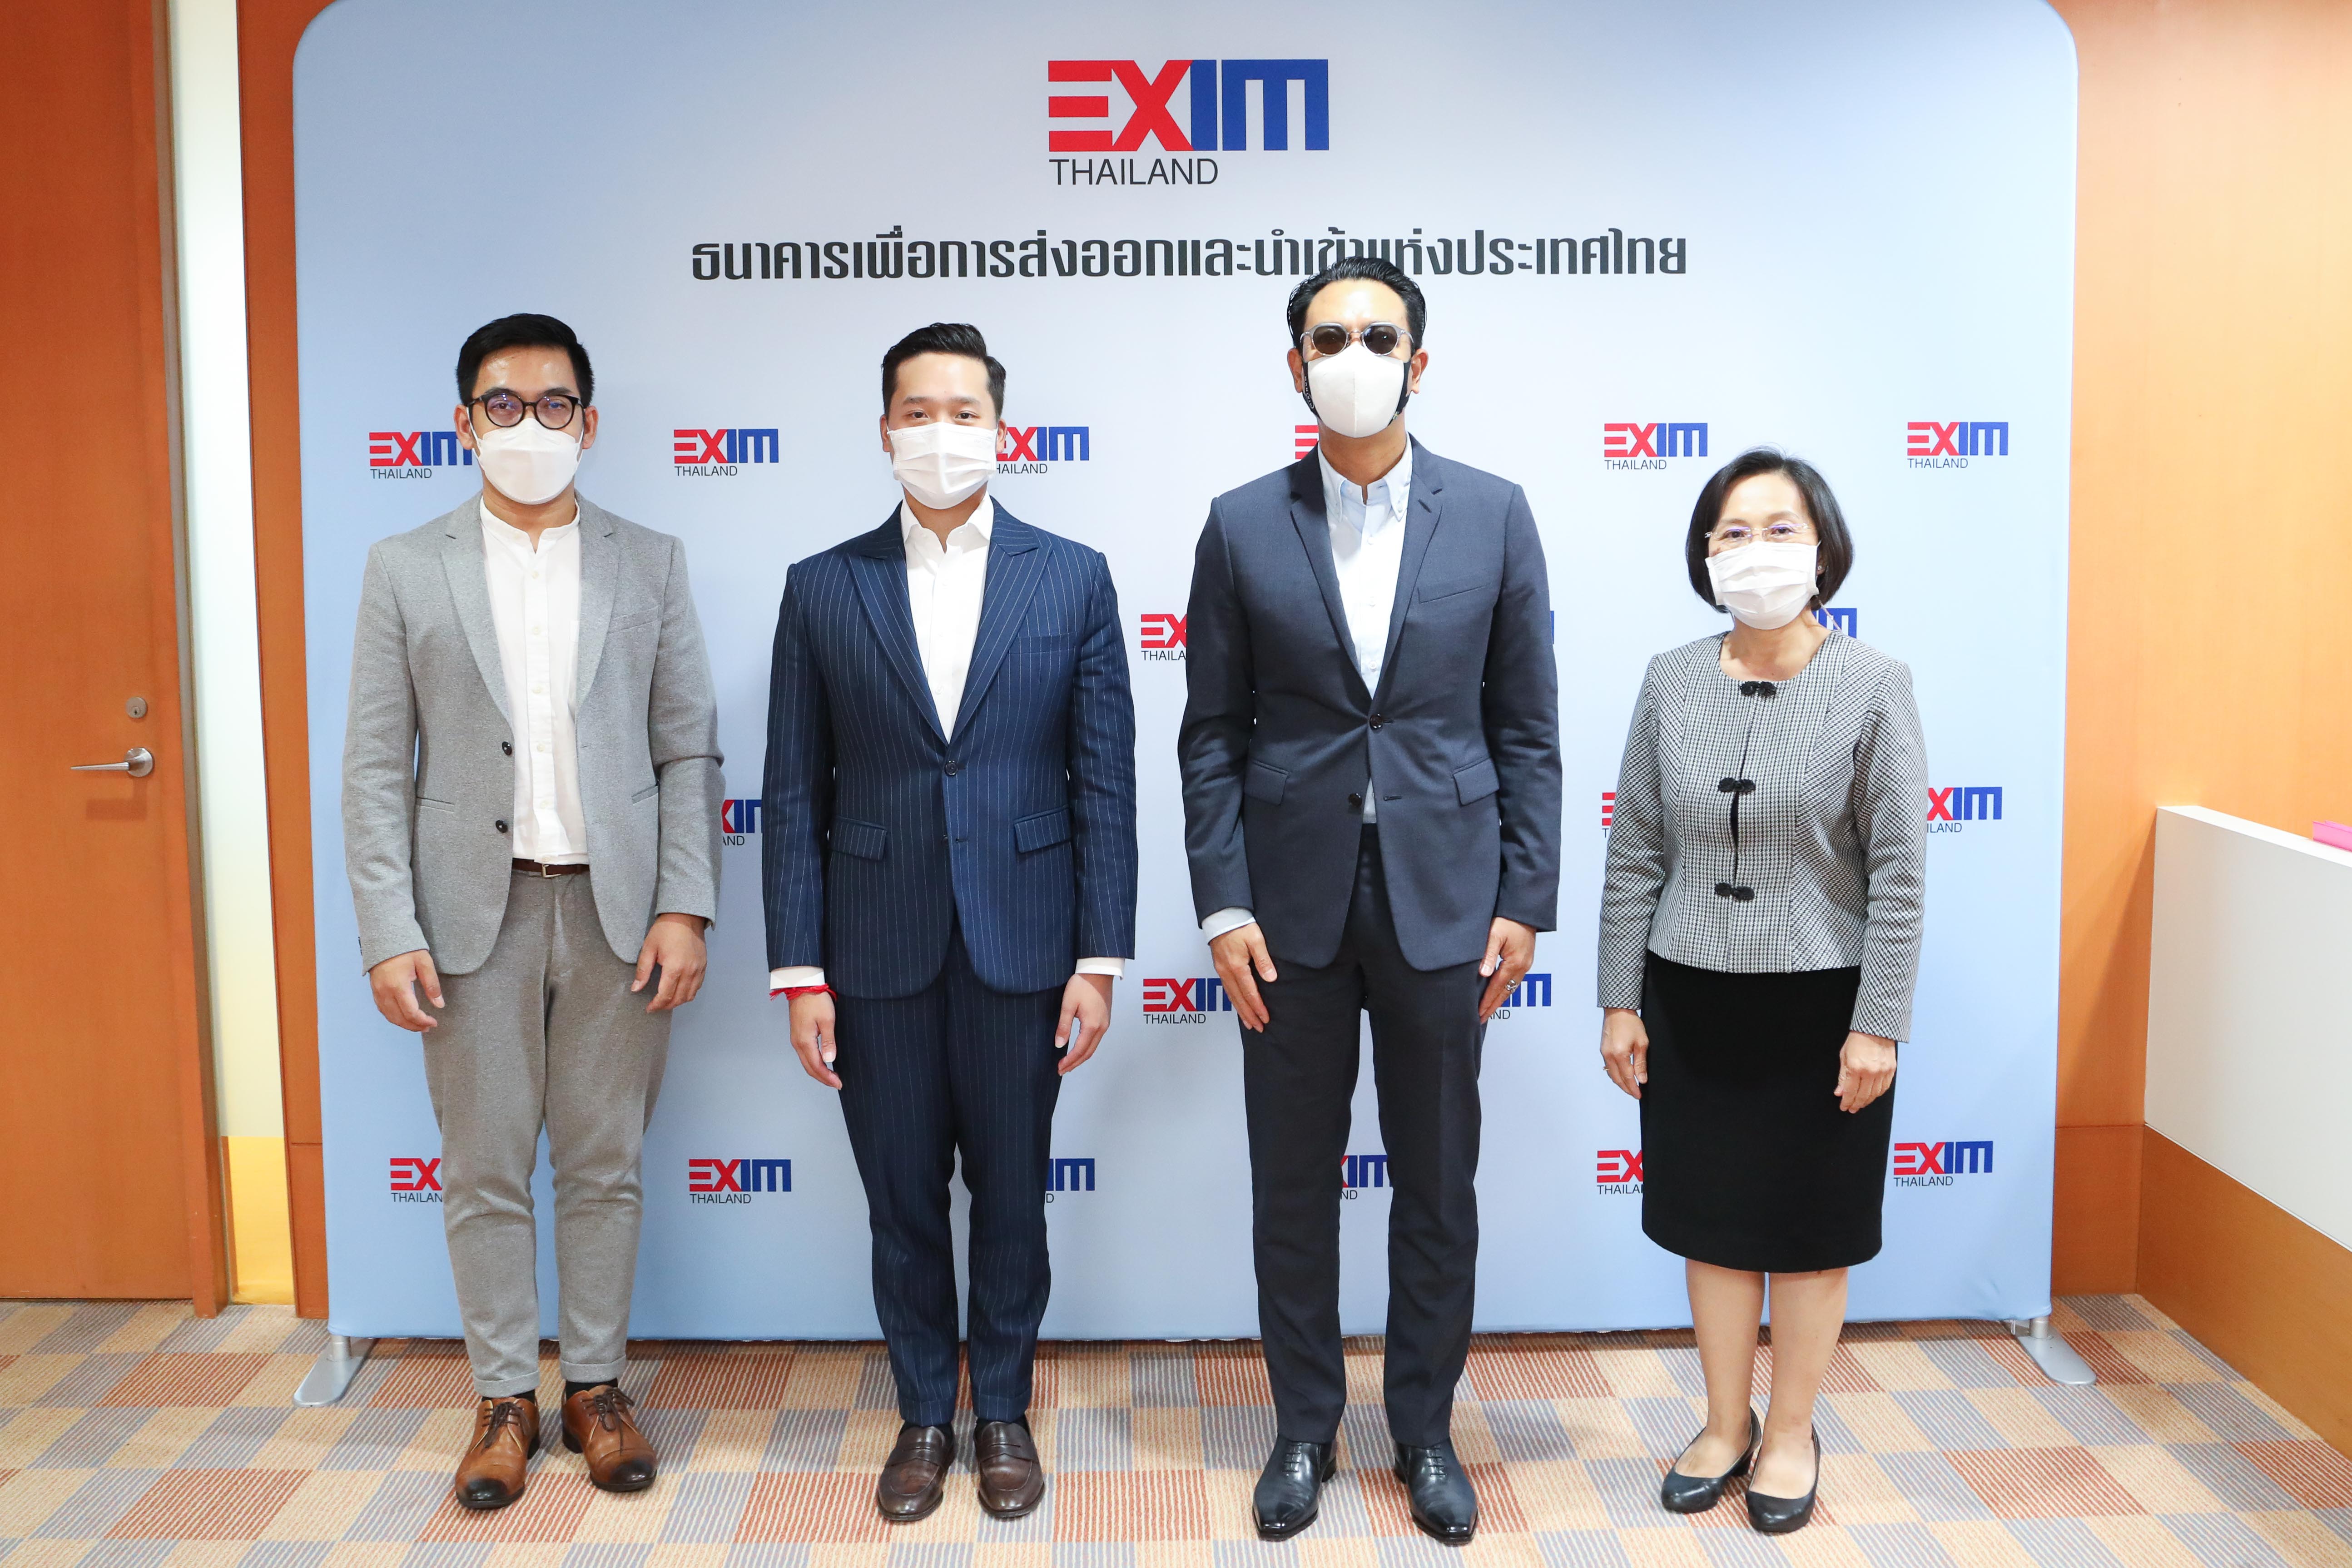 EXIM Thailand Meets with Rakbankerd Co., Ltd. to Discuss Ways to Support Thai Farmer